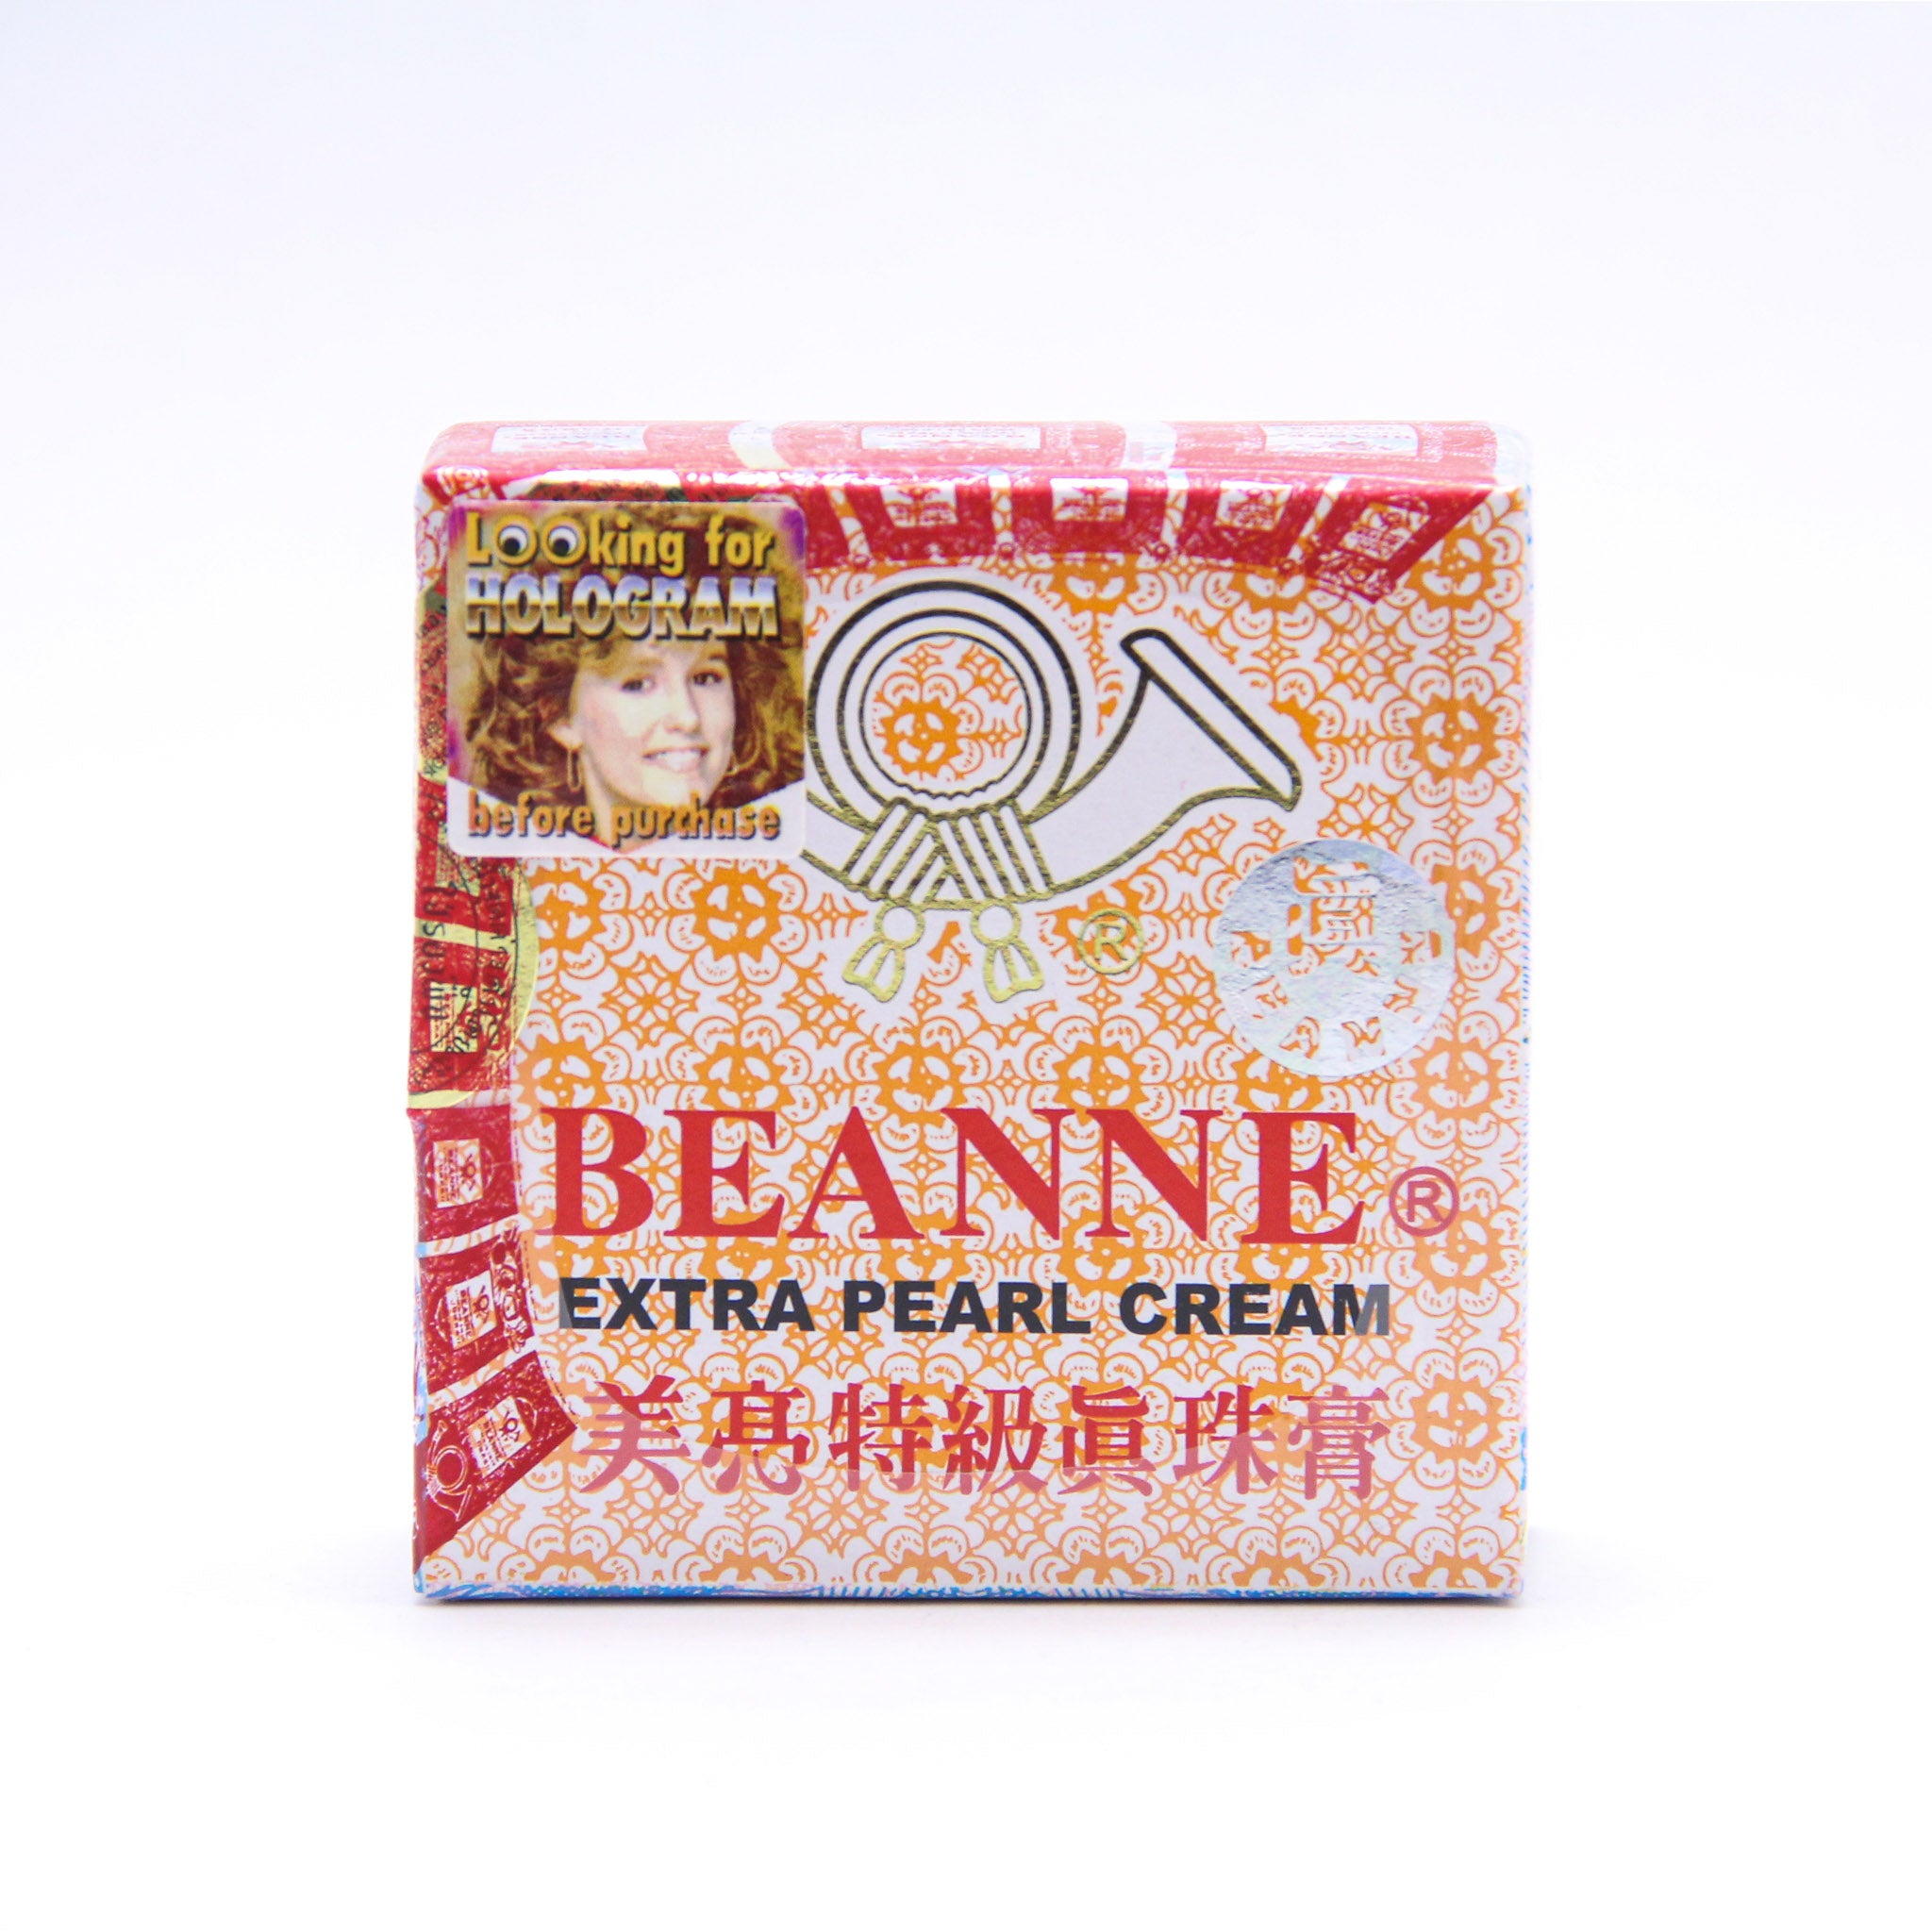 Beanne Extra Peal Cream - Yellow (For Freckles), 0.3 oz:   If you are frustrated by the appearance of freckles on your face, this cream is a good choice. It is specially formulated to reduce the appearance of marks on the skin. It also helps to make dark spots fade.